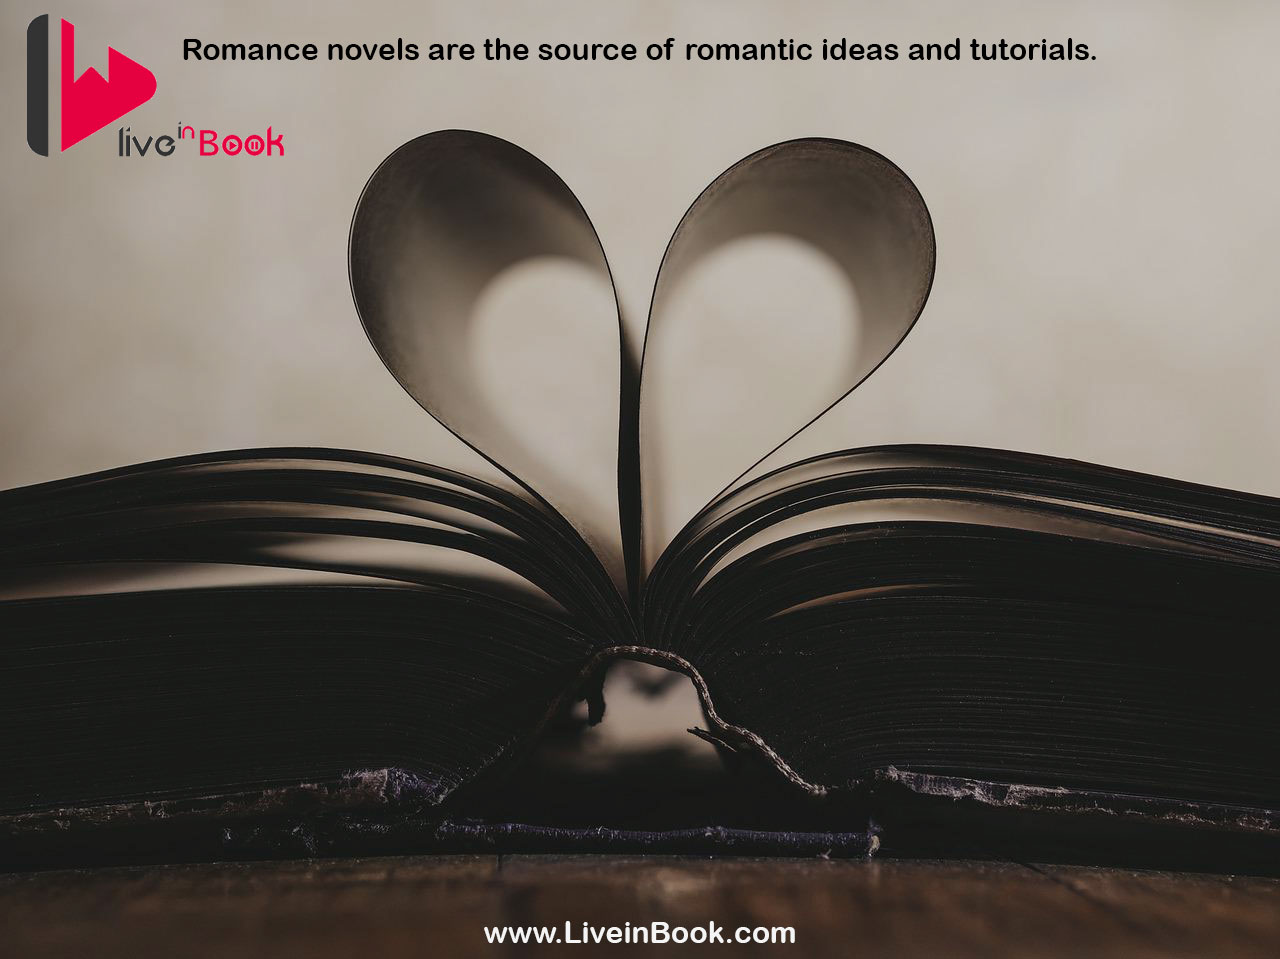 Romance novels are the source of romantic ideas and tutorials.